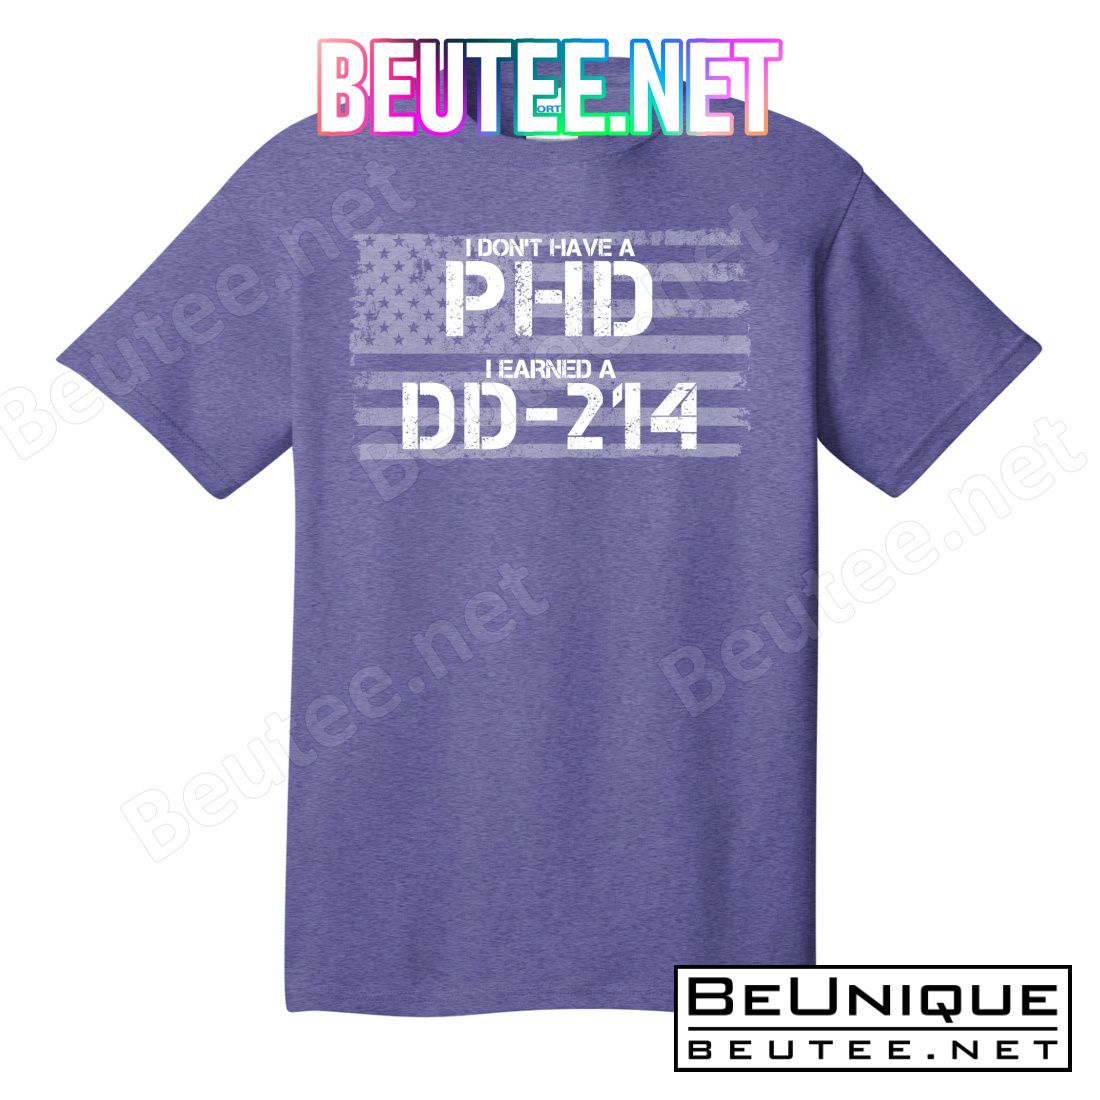 I Don't Have A PHD I Earned A DD-214 T-Shirts